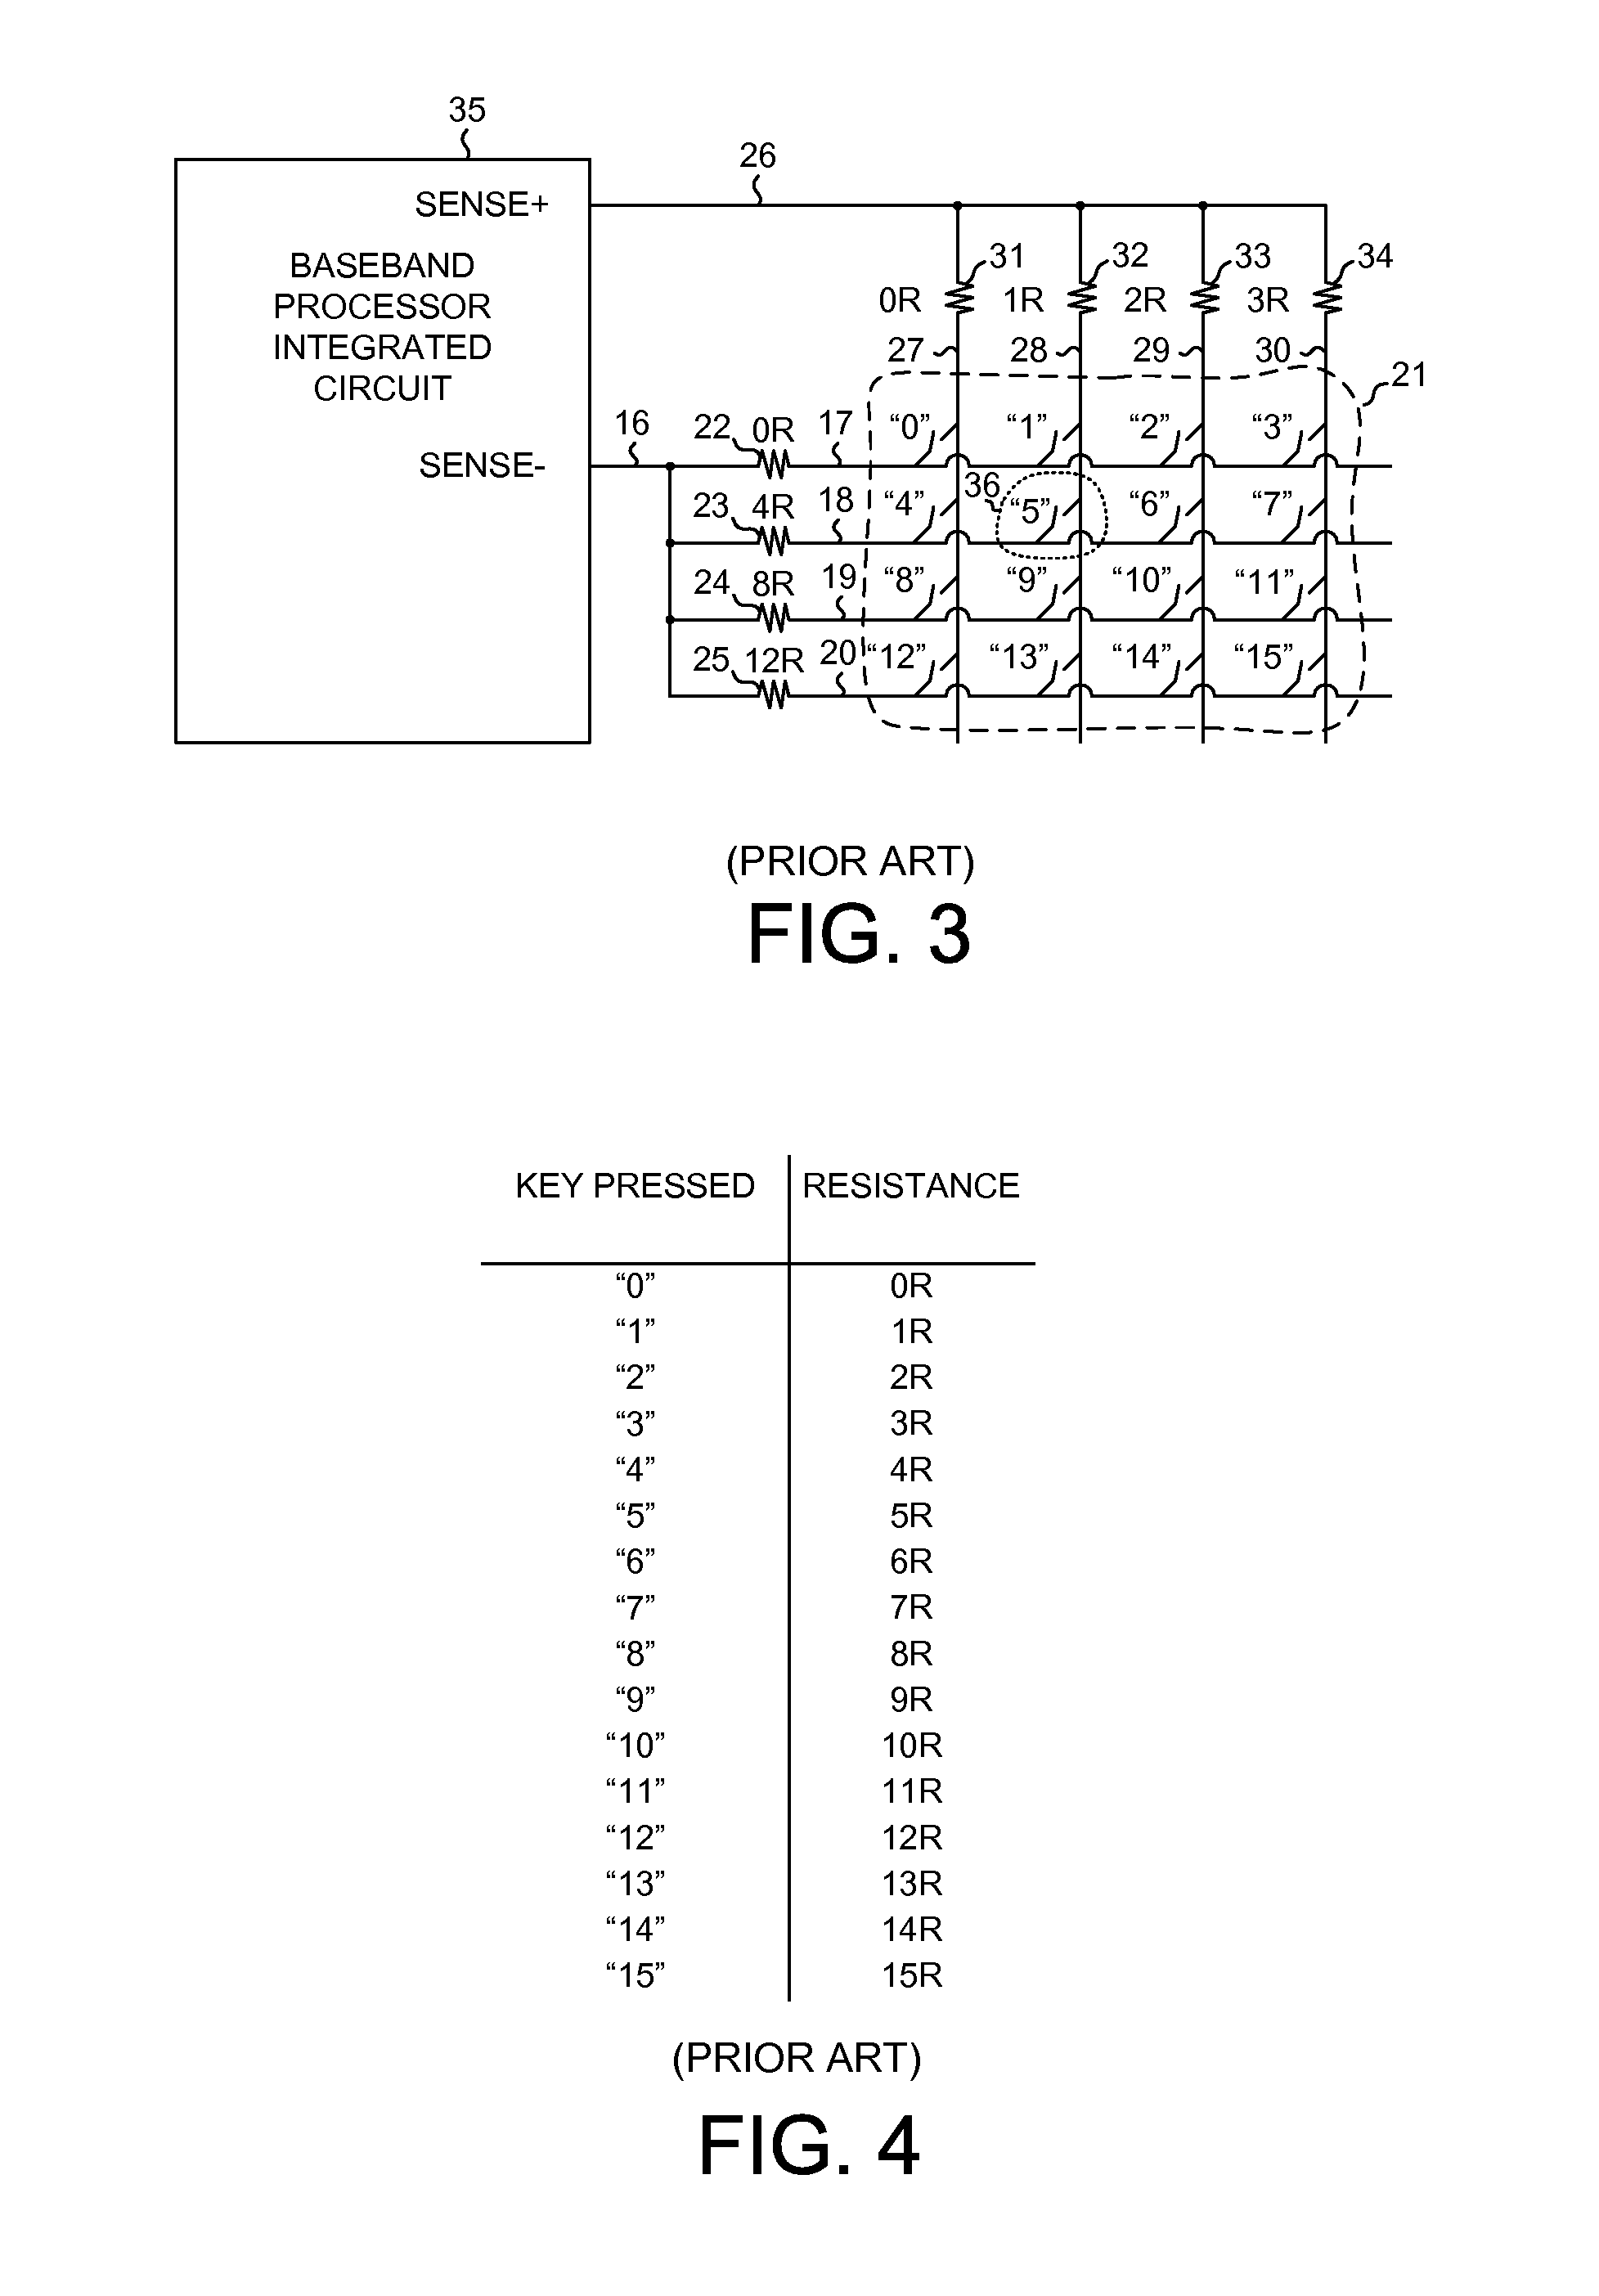 Two-Wire Connection to a Key Matrix in a Mobile Device